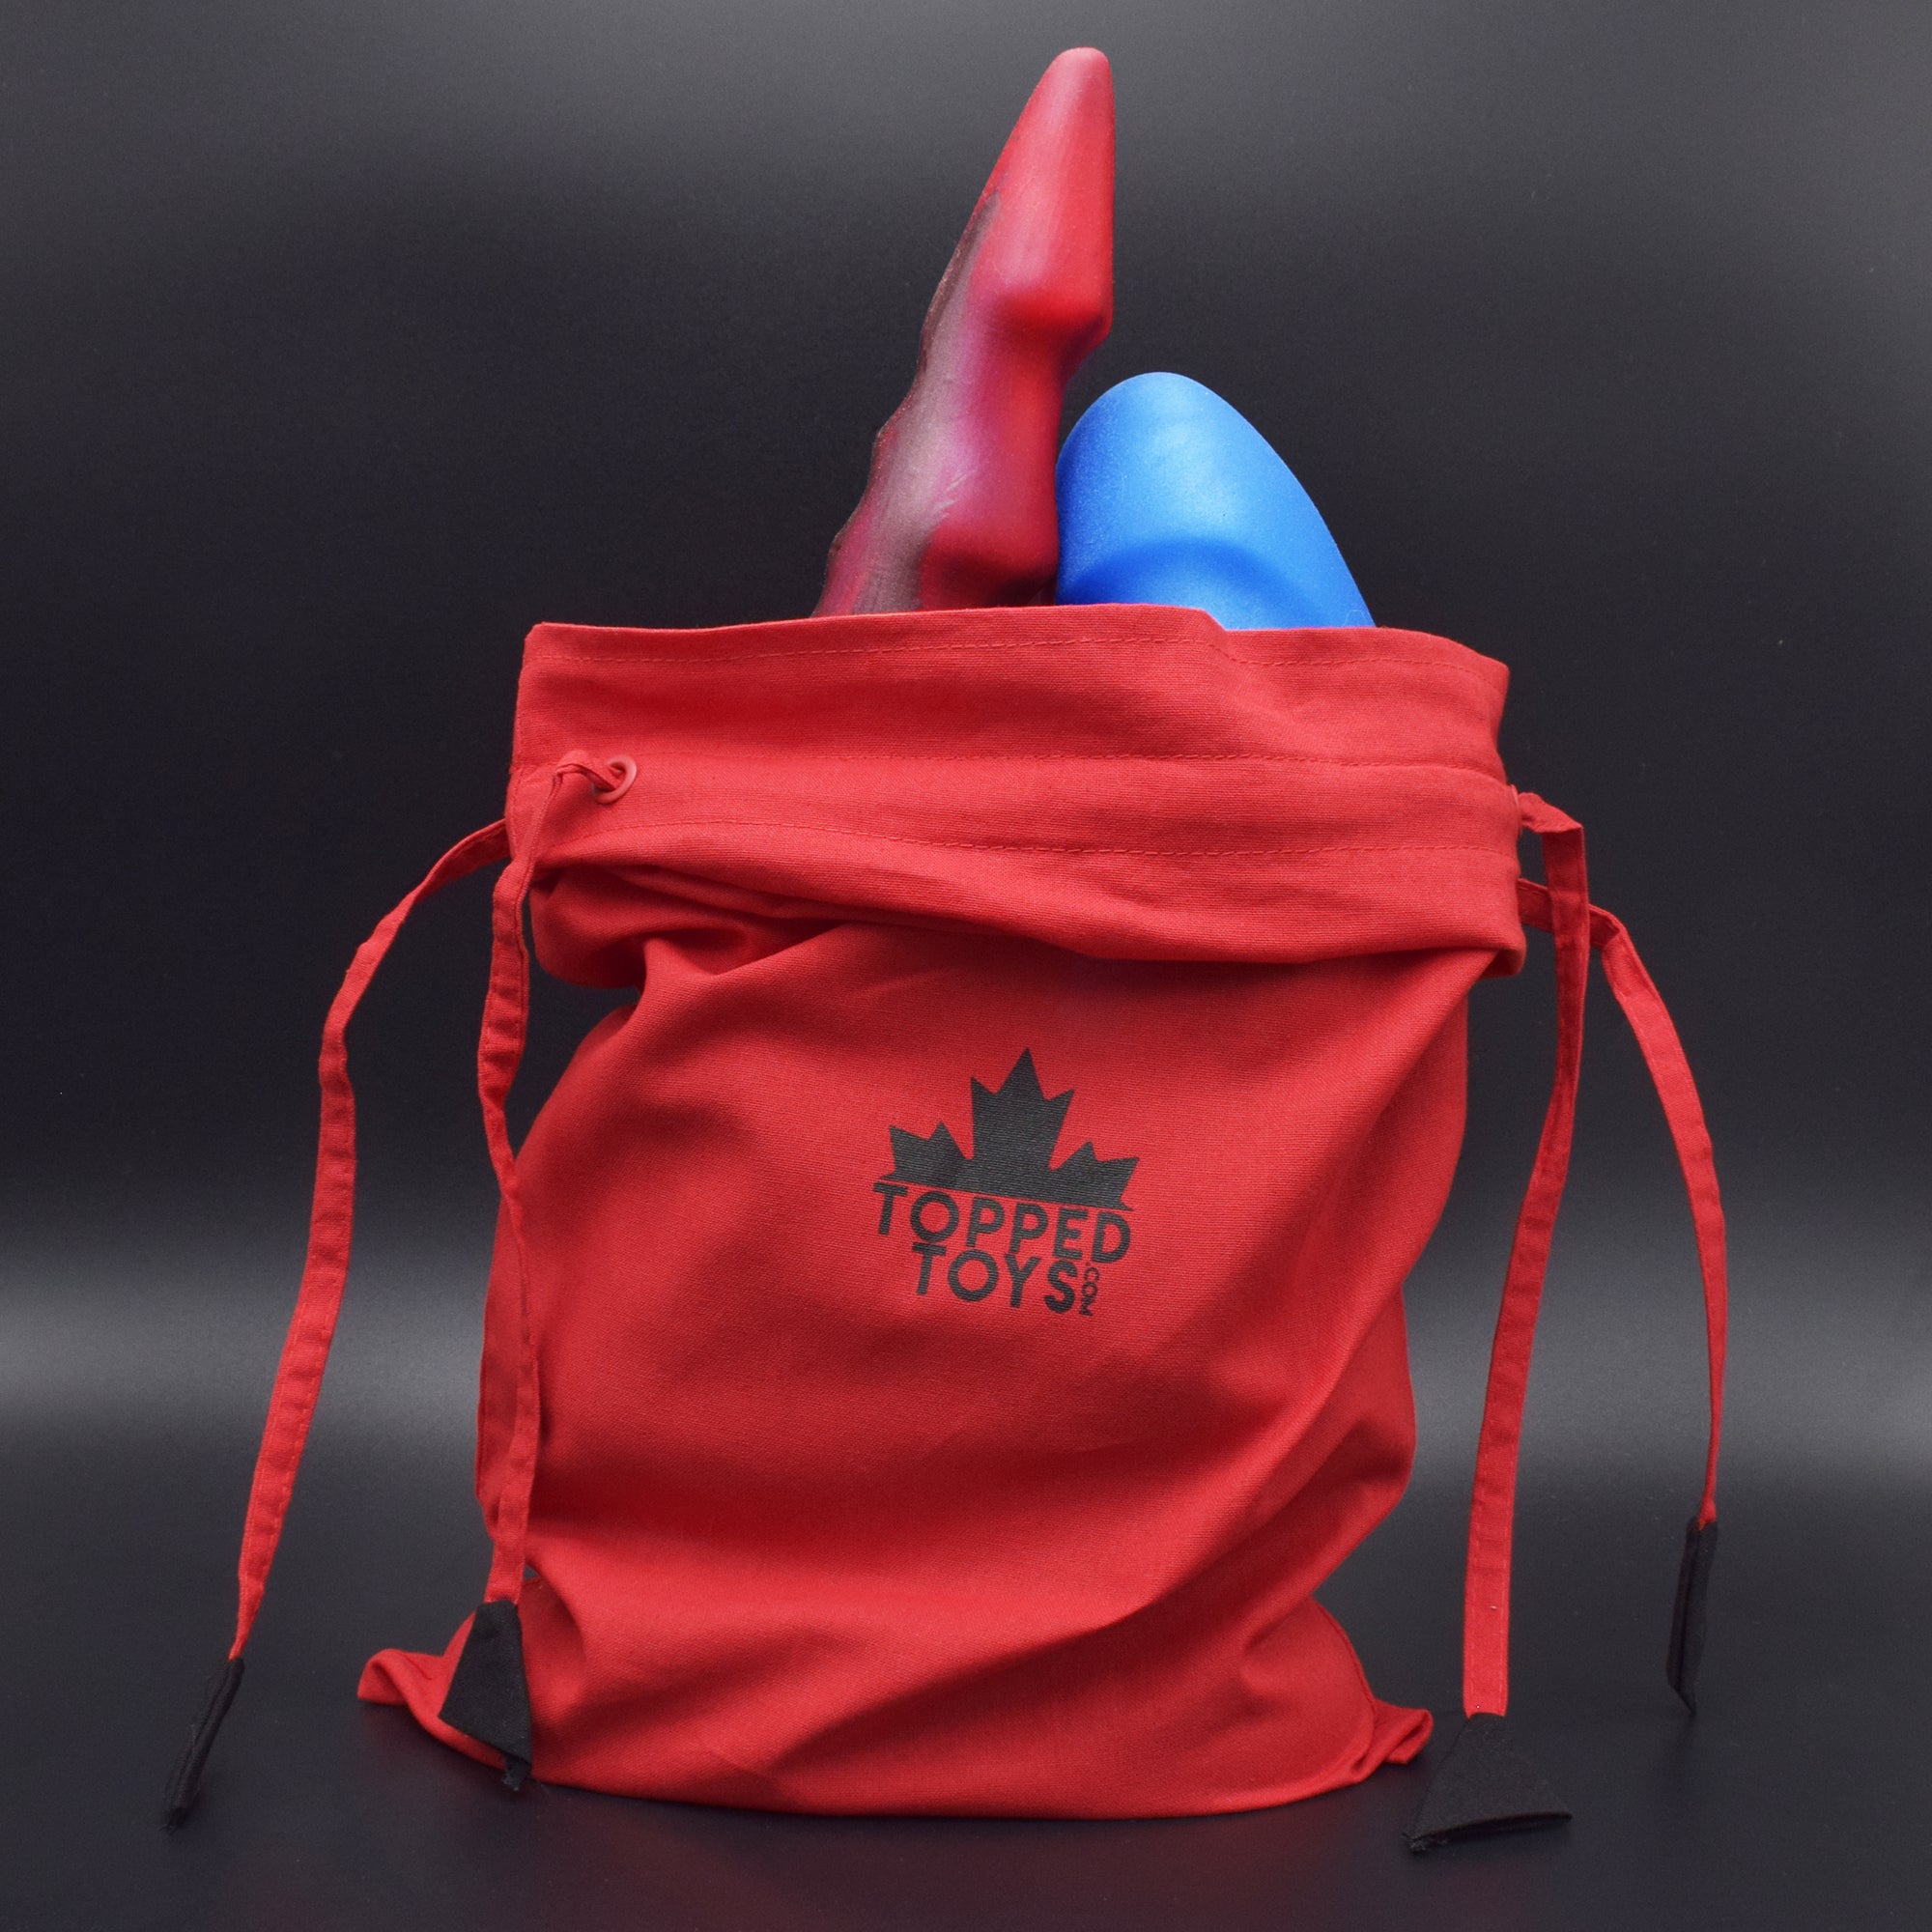 Medium Topped Toys Bag, with Hilt 115 in Blue Steel and Spike 105 in Forge Red